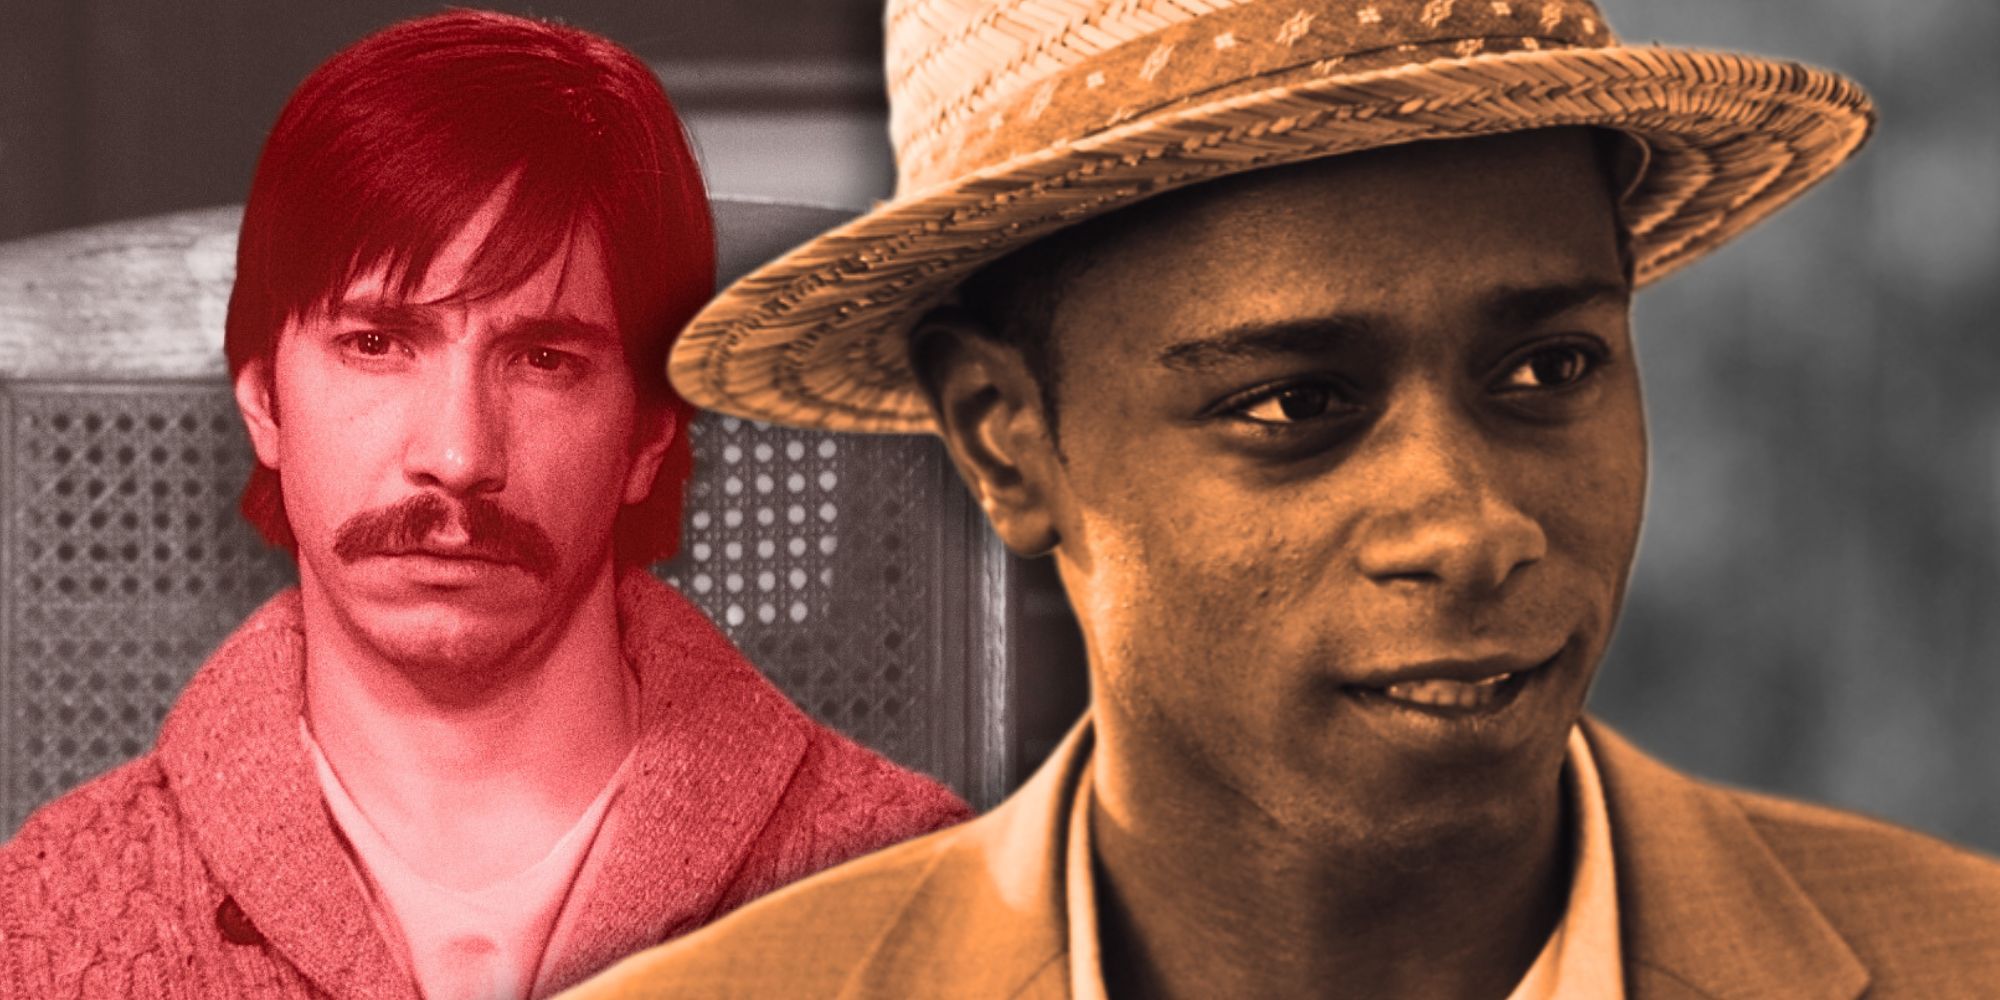 Justin Long in Tusk and LaKeith Stanfield in Get Out